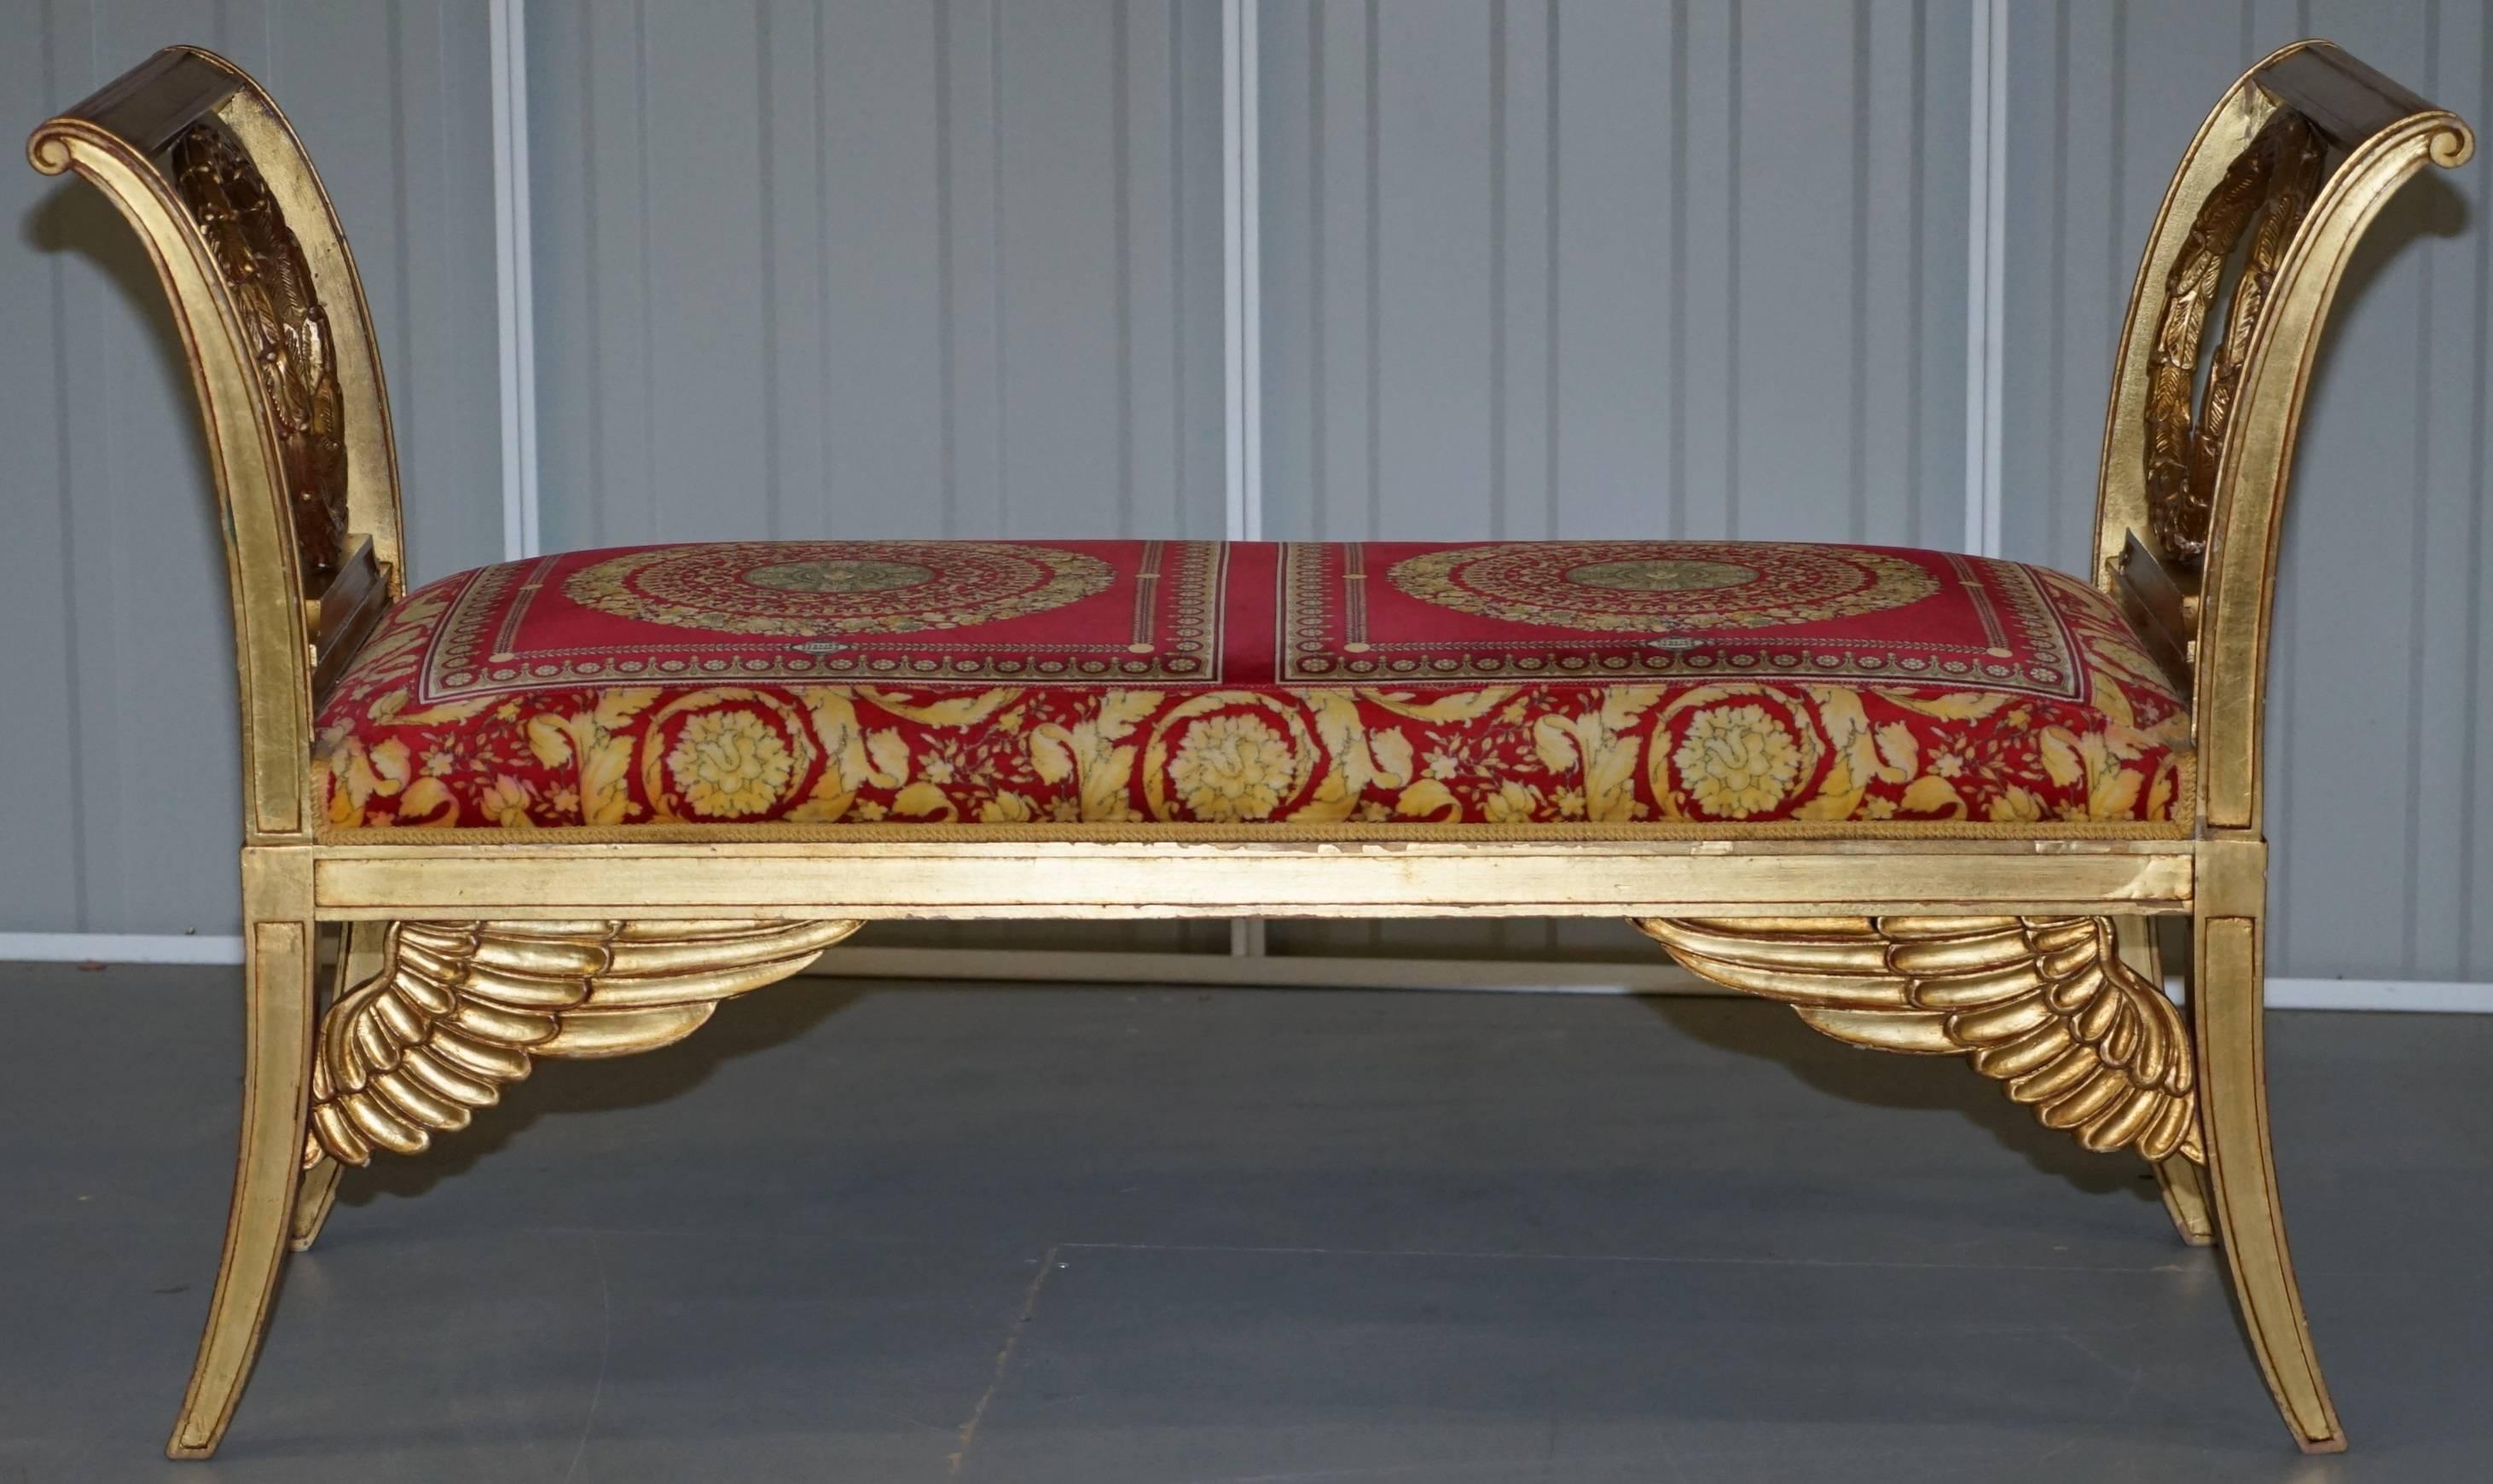 We are delighted to offer this stunning and exceptionally rare Versace real gold leaf painted French Louis window seat bench

This piece is simply put bespoke made to order, in excellent condition and absolutely stunning from every angle

The